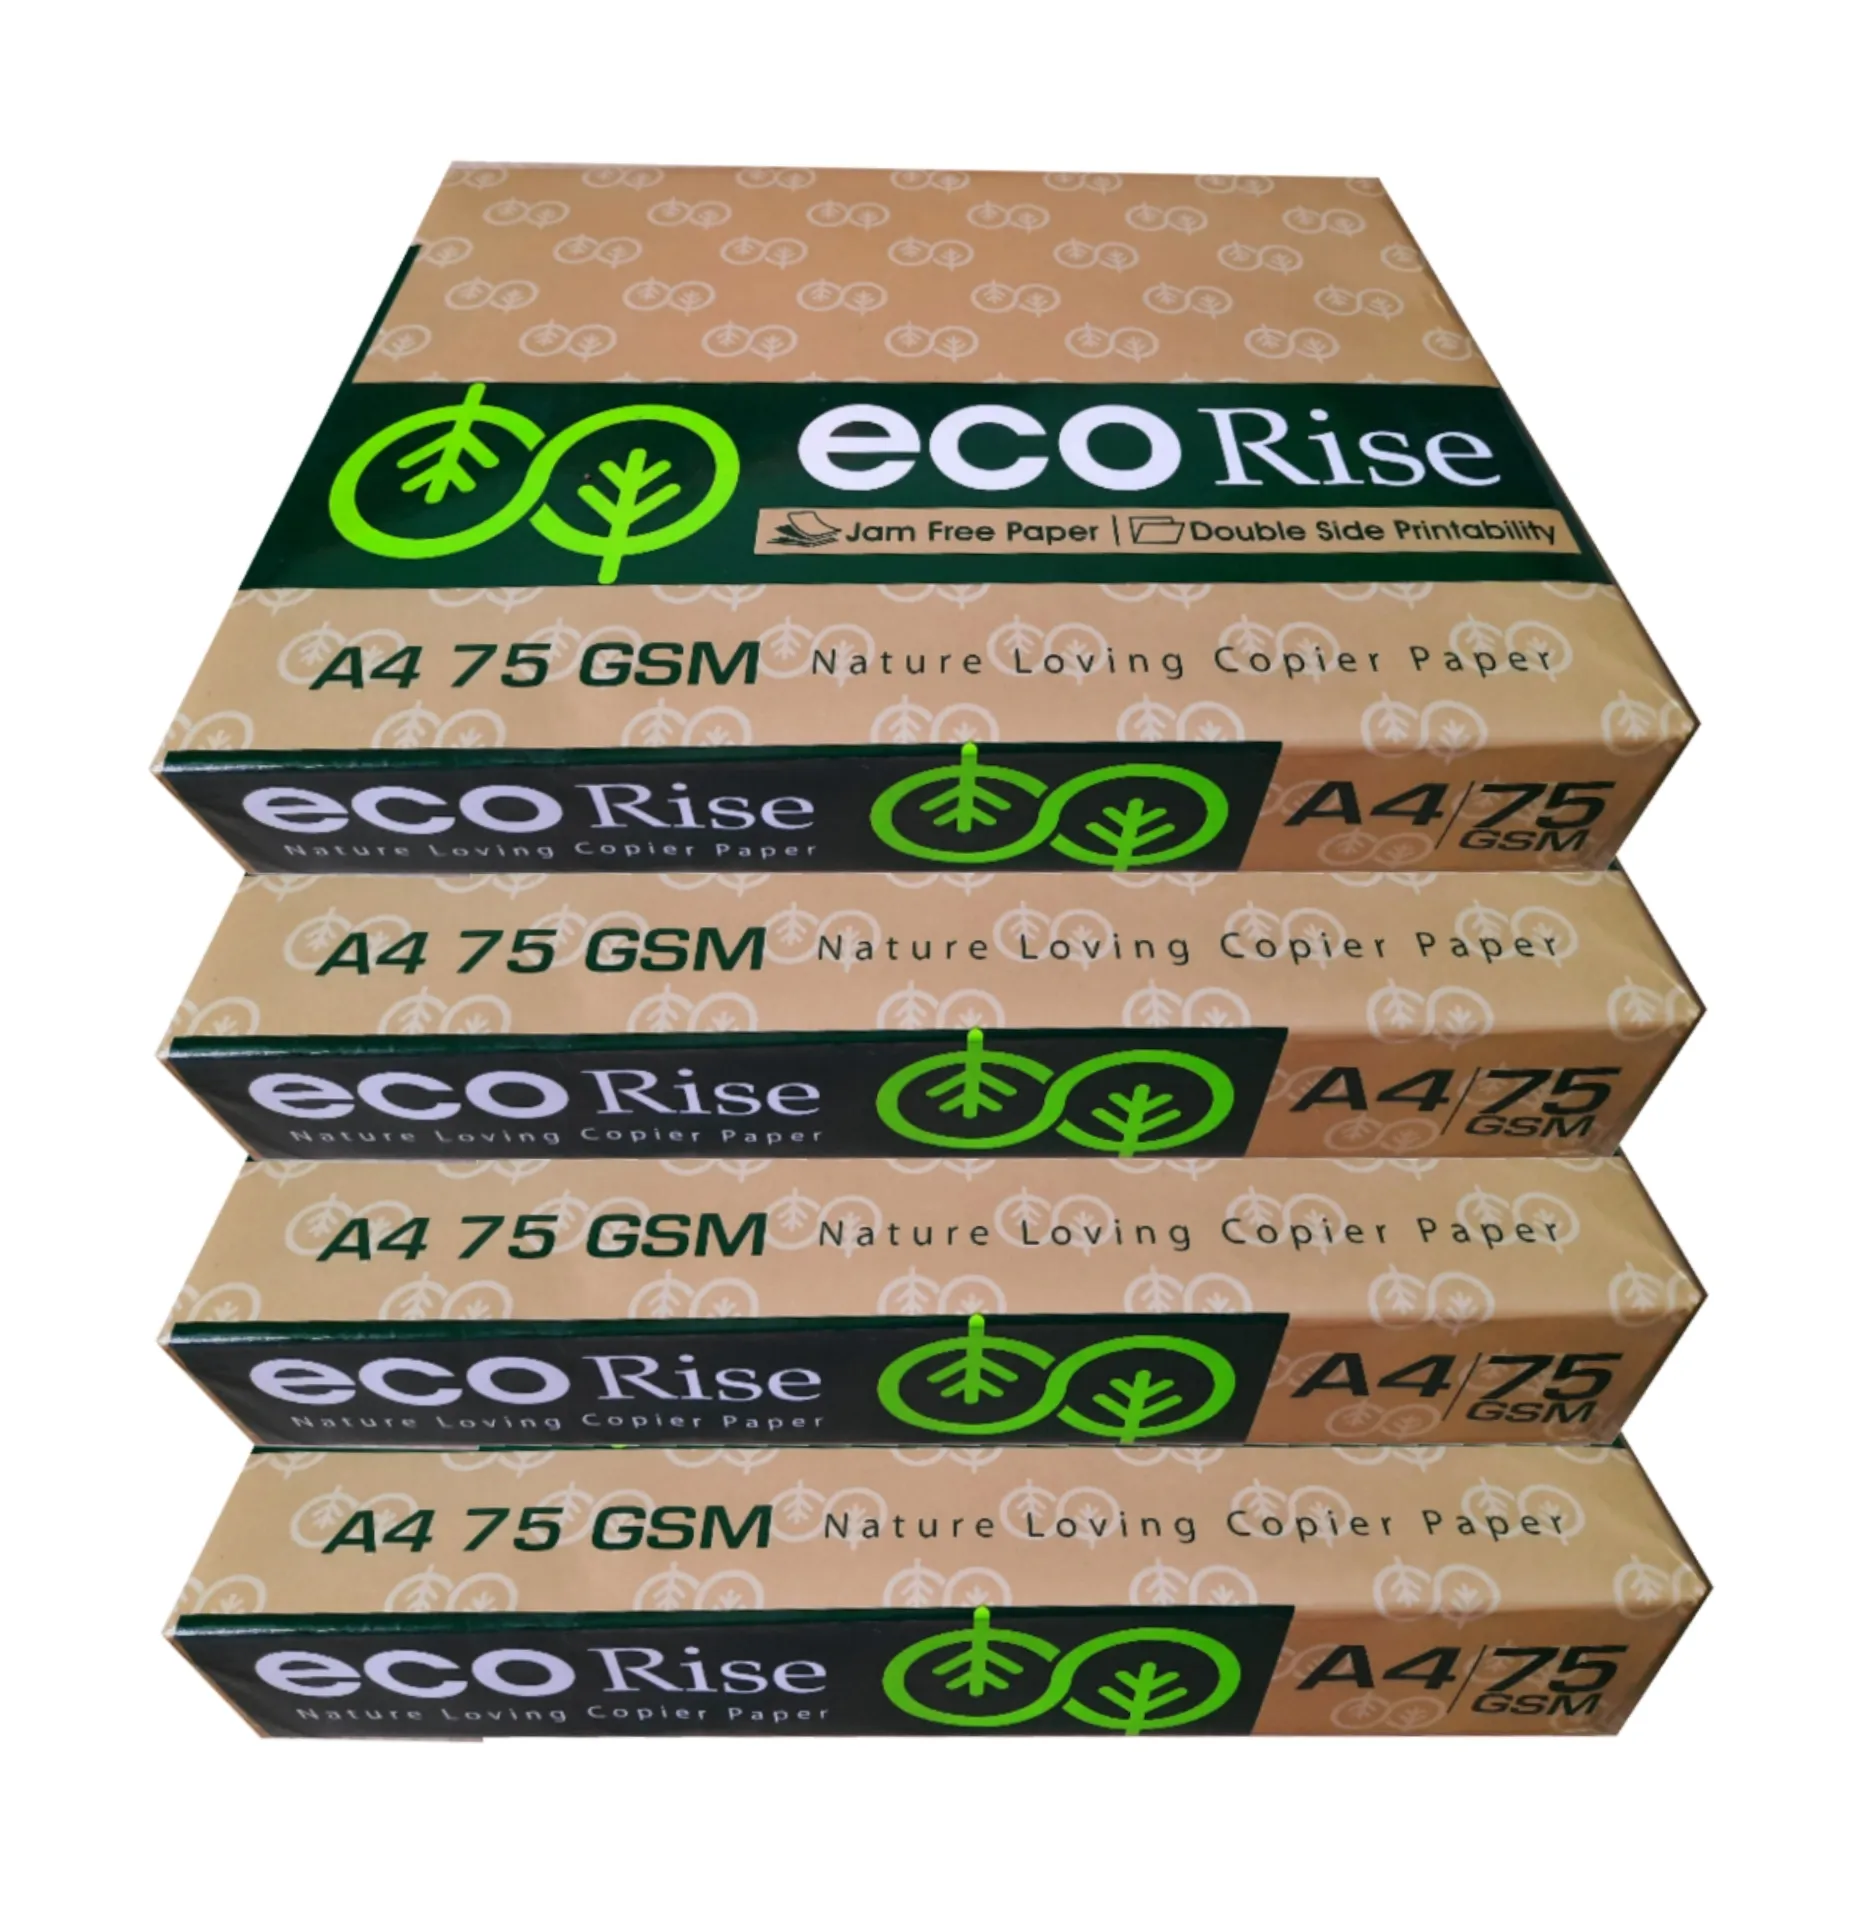 Eco Rise Printing Copy A4 Size JK Paper Eco Tree Friendly 75 GSM 500 Sheet Pack of 4